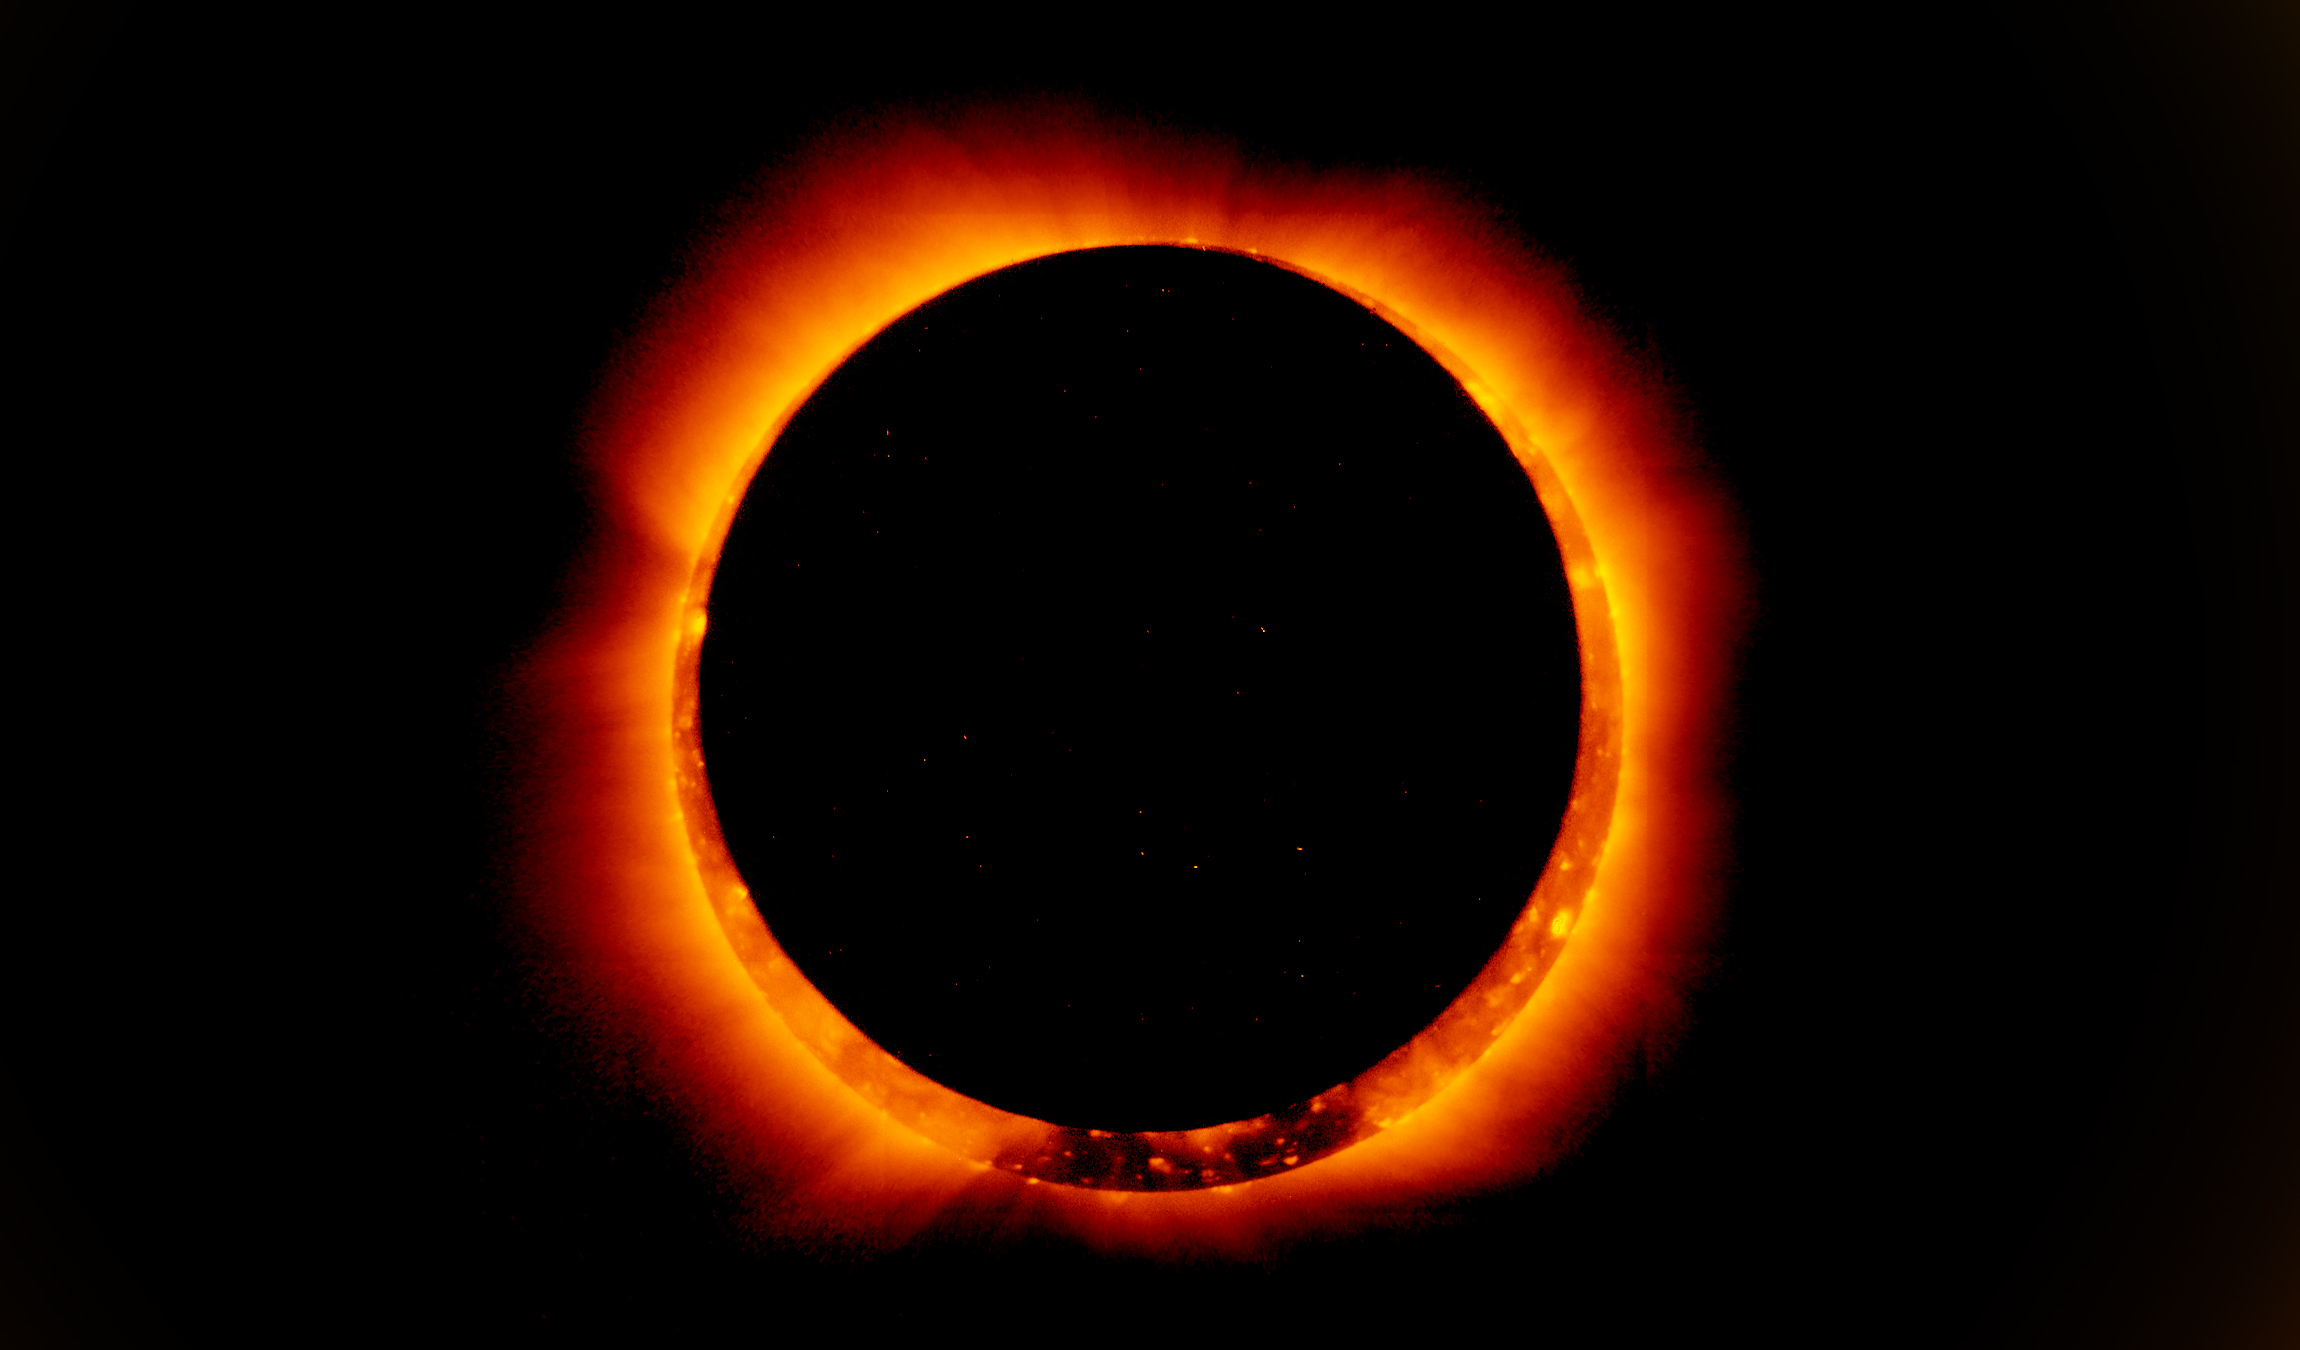 An annular solar eclipse is happening on the summer solstice. (But no